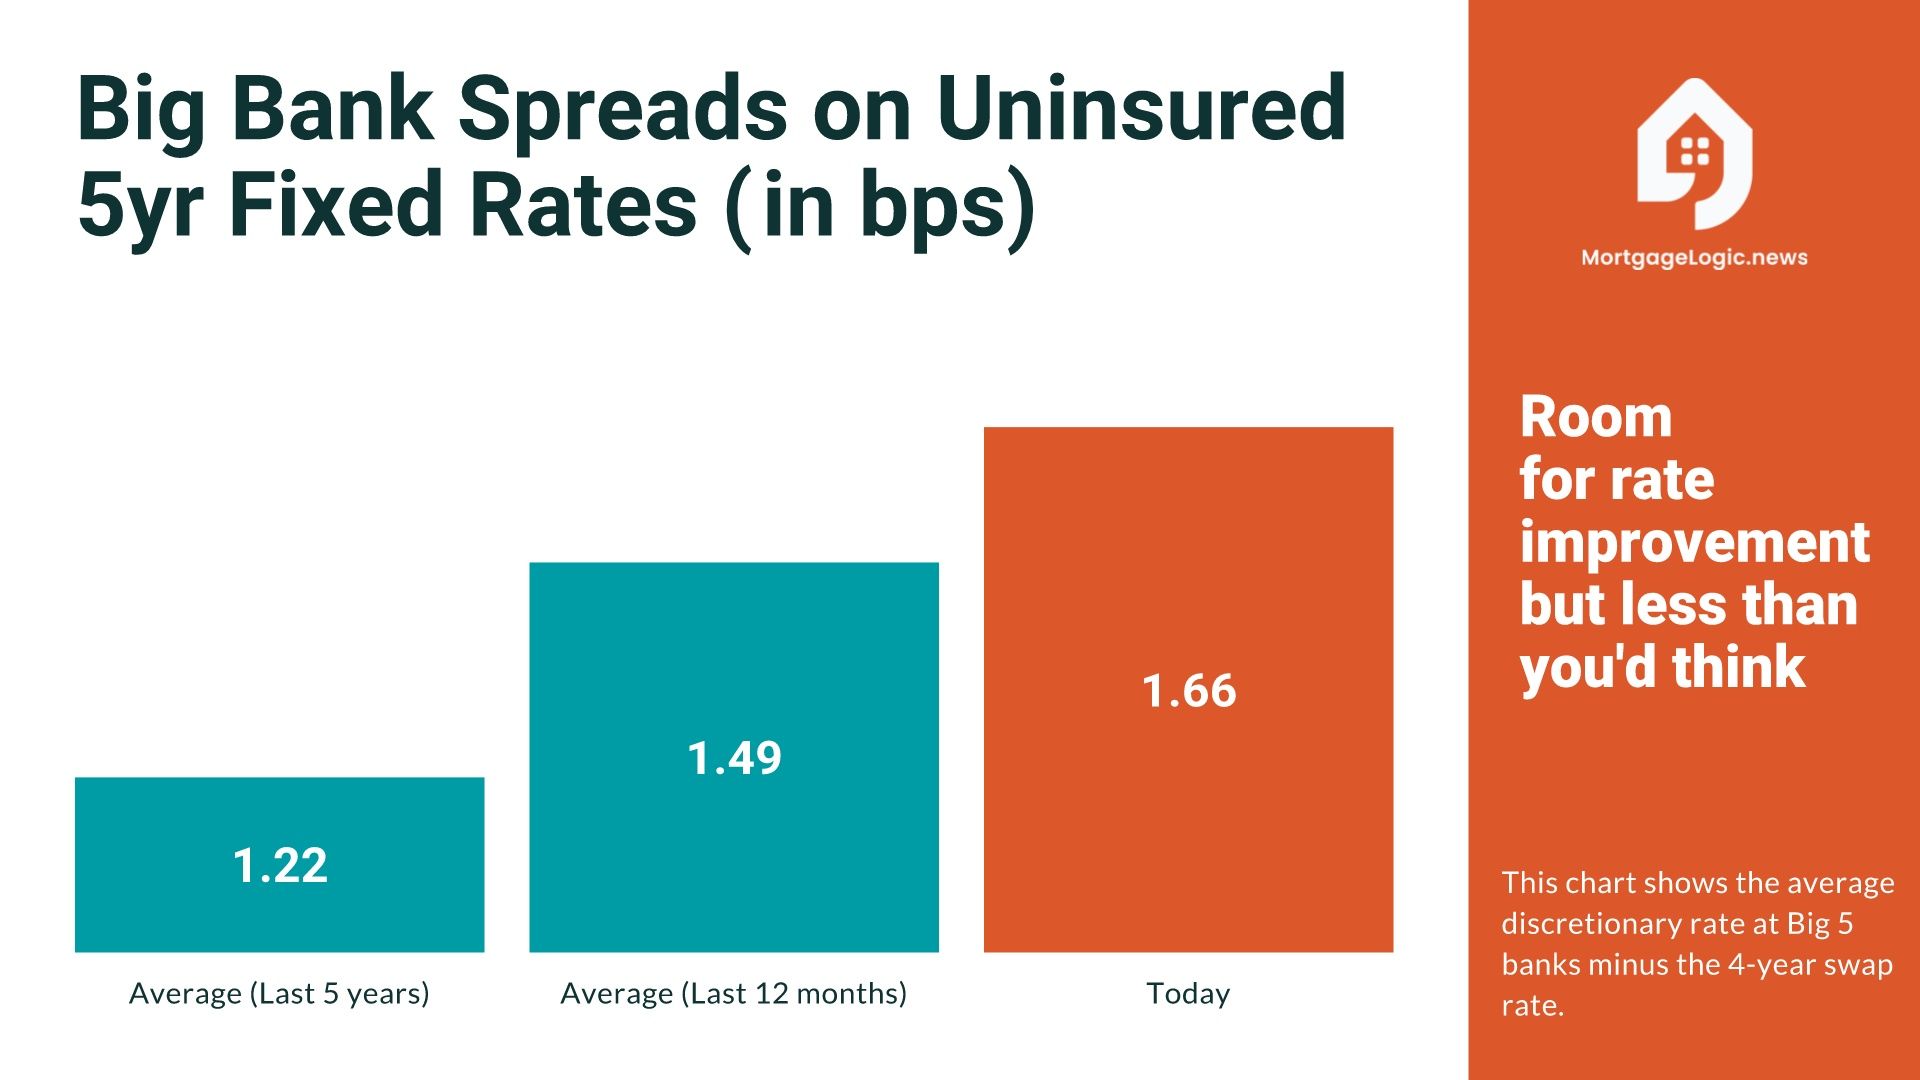 More reasons why banks seem stingy on uninsured rates